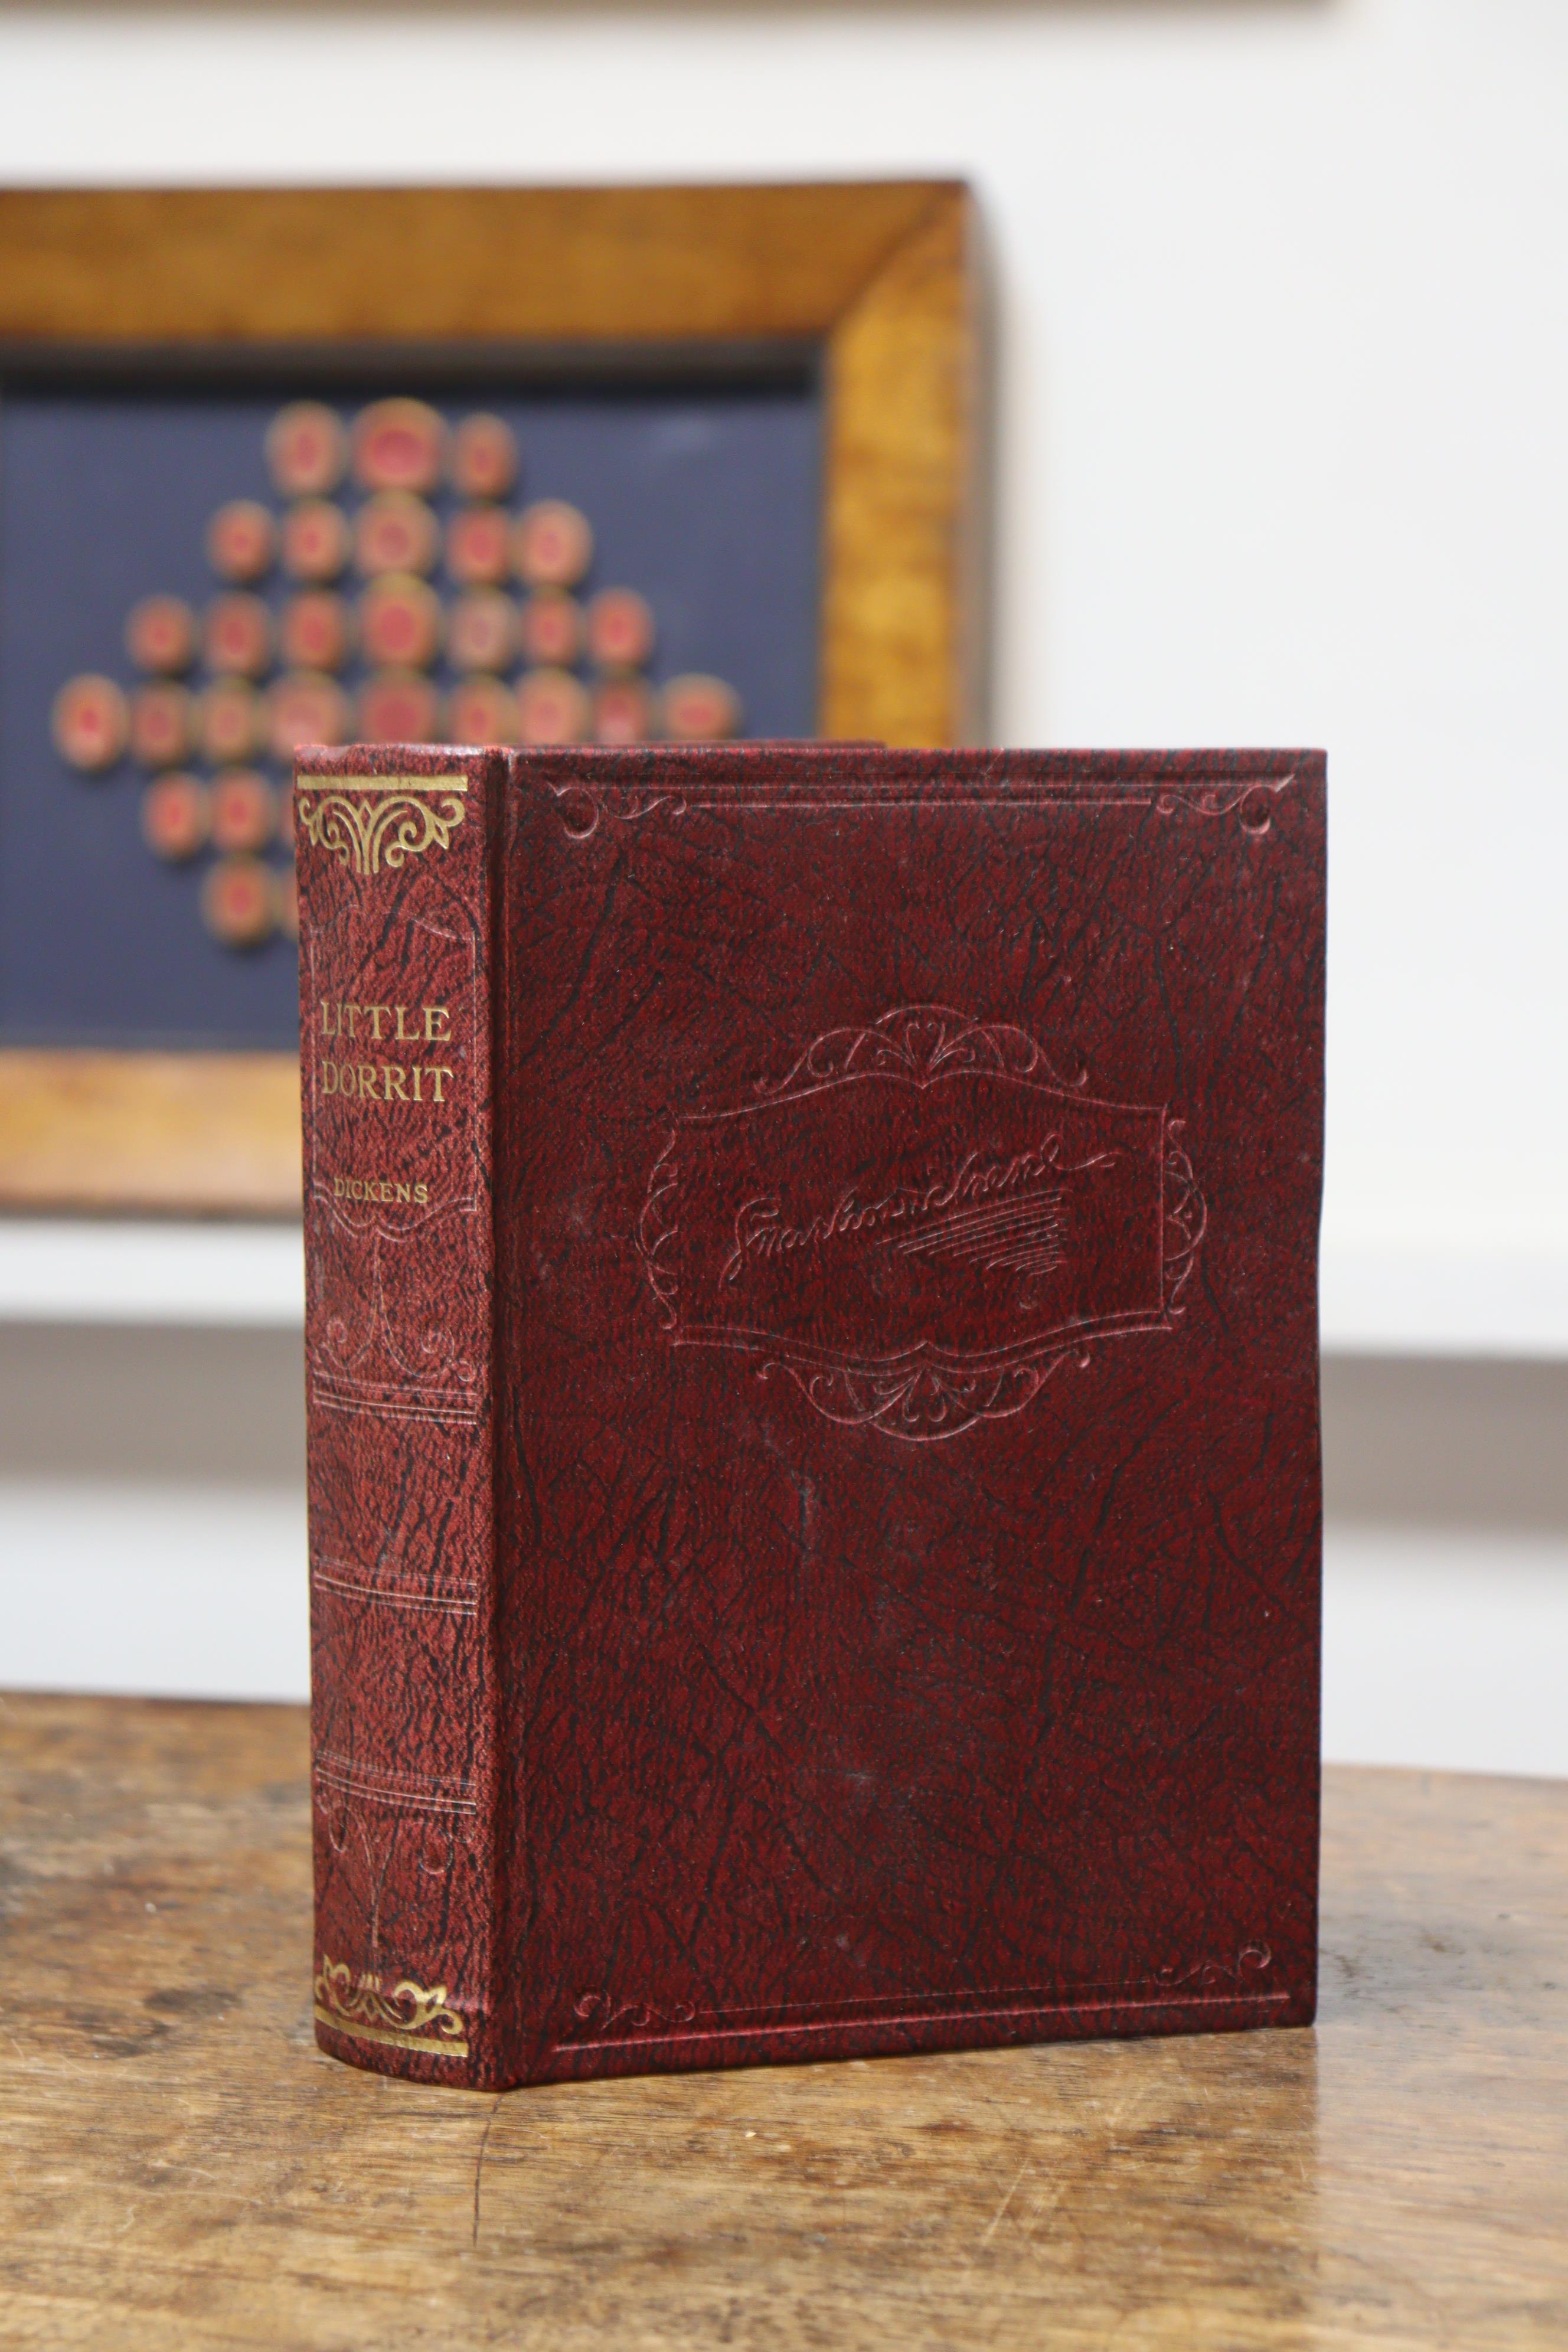 Works of Charles Dickens, A set of 16 volumes, circa 1930’s, published by Hazell, Watson & Viney, - Image 3 of 4